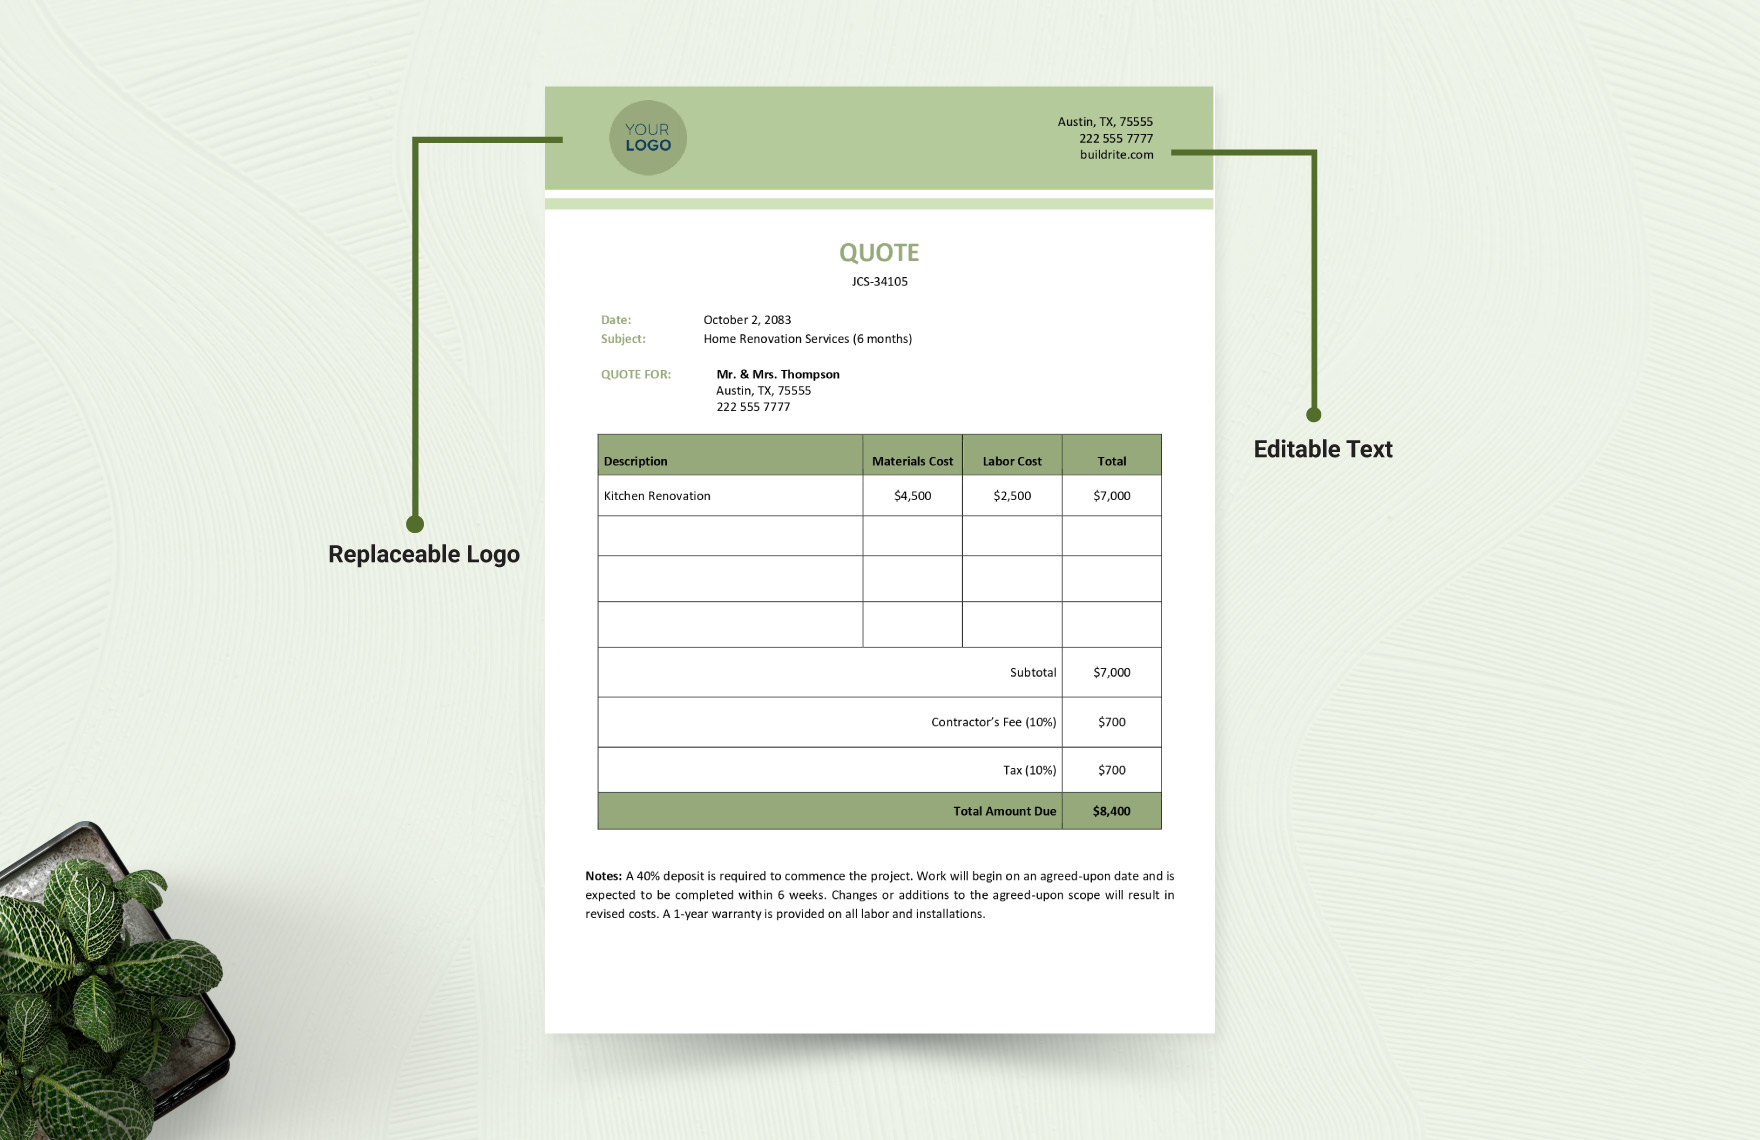 Contractor Quotation Template